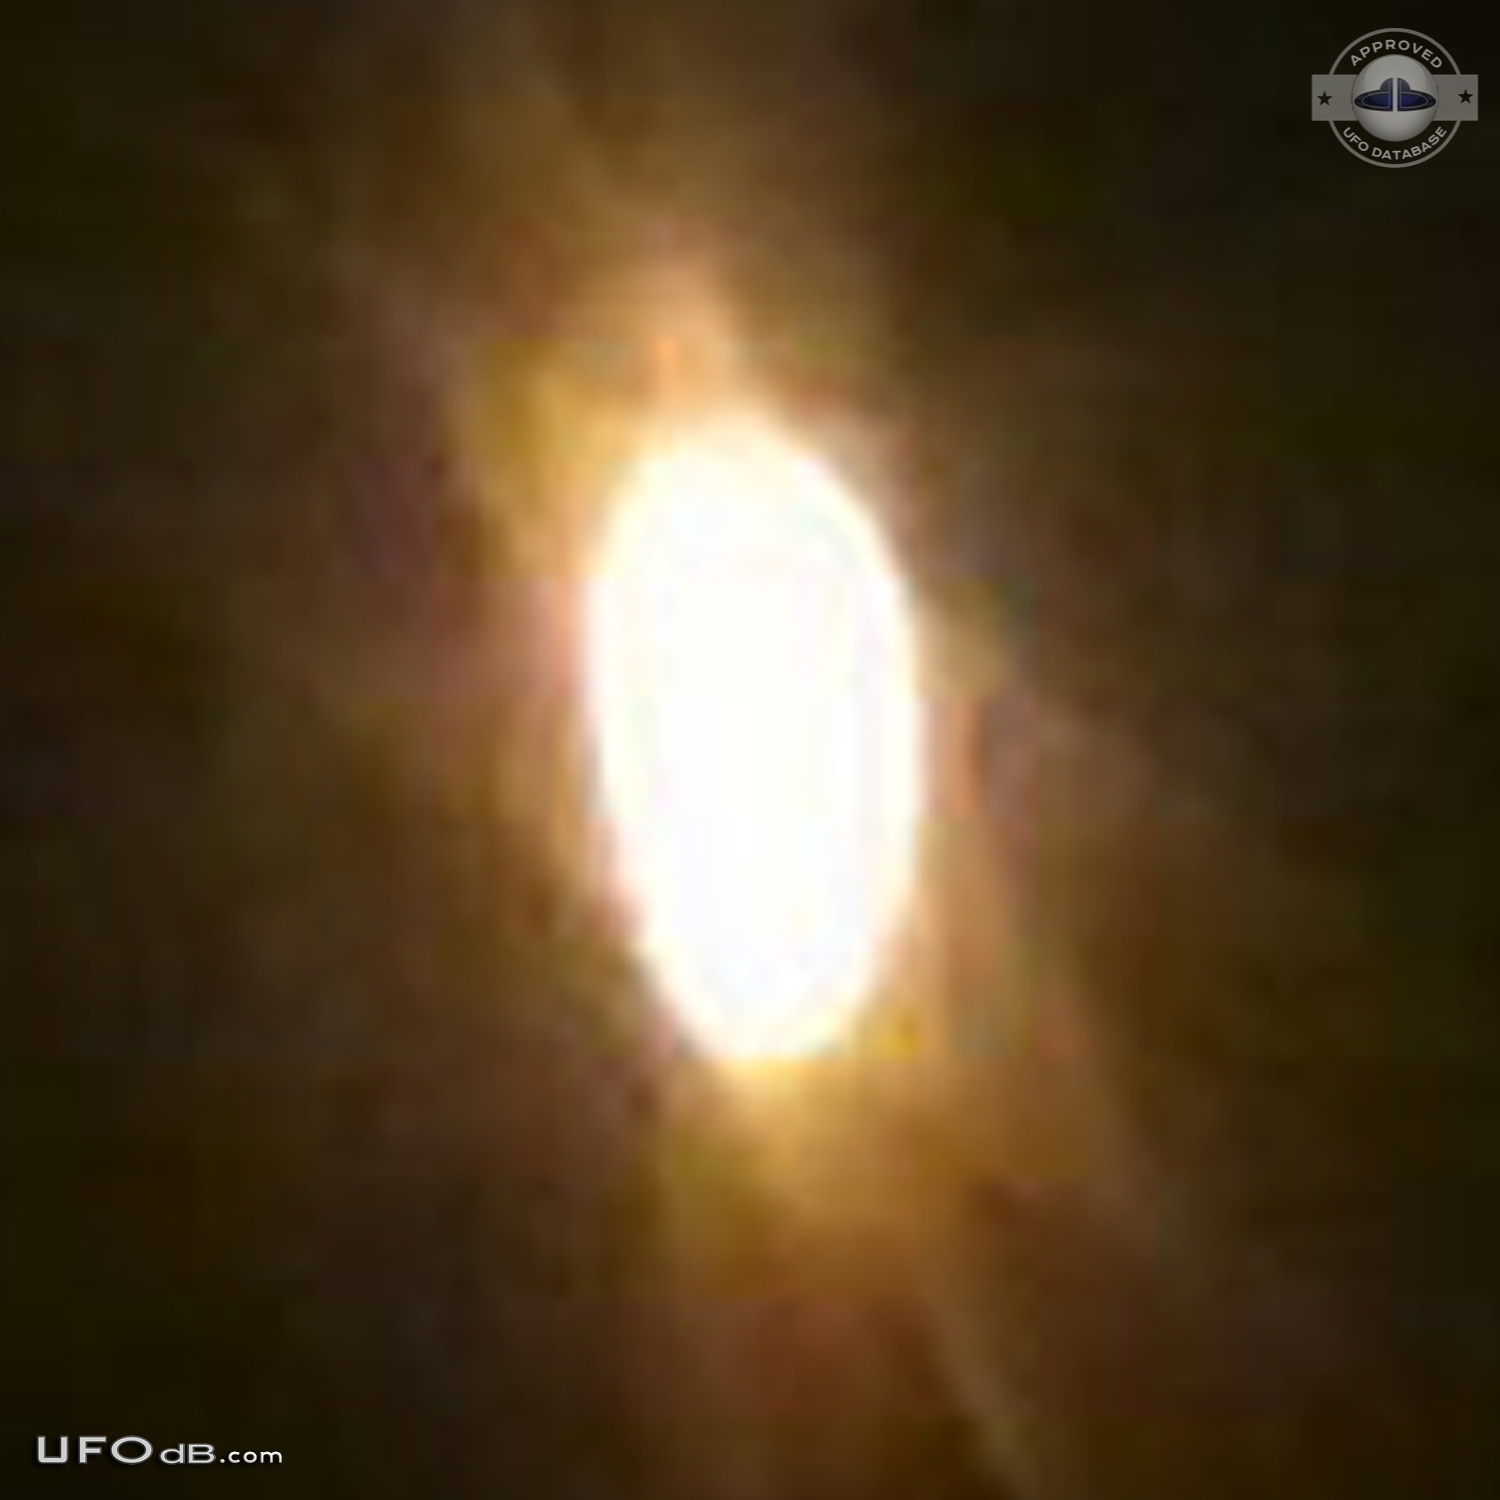 Two Jets follow UFO near Great Falls in Montana USA 2015 UFO Picture #644-4